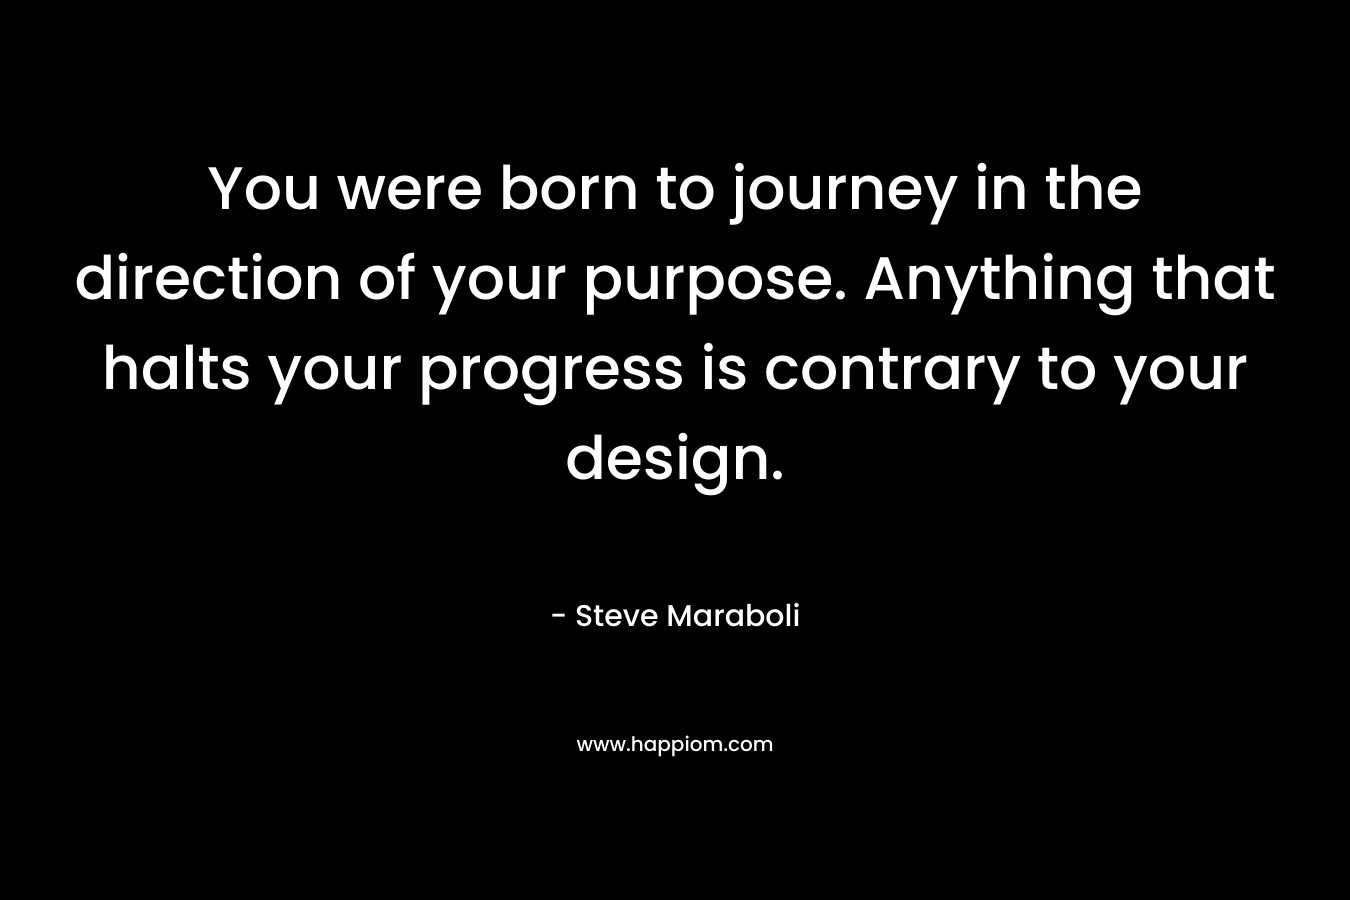 You were born to journey in the direction of your purpose. Anything that halts your progress is contrary to your design. – Steve Maraboli